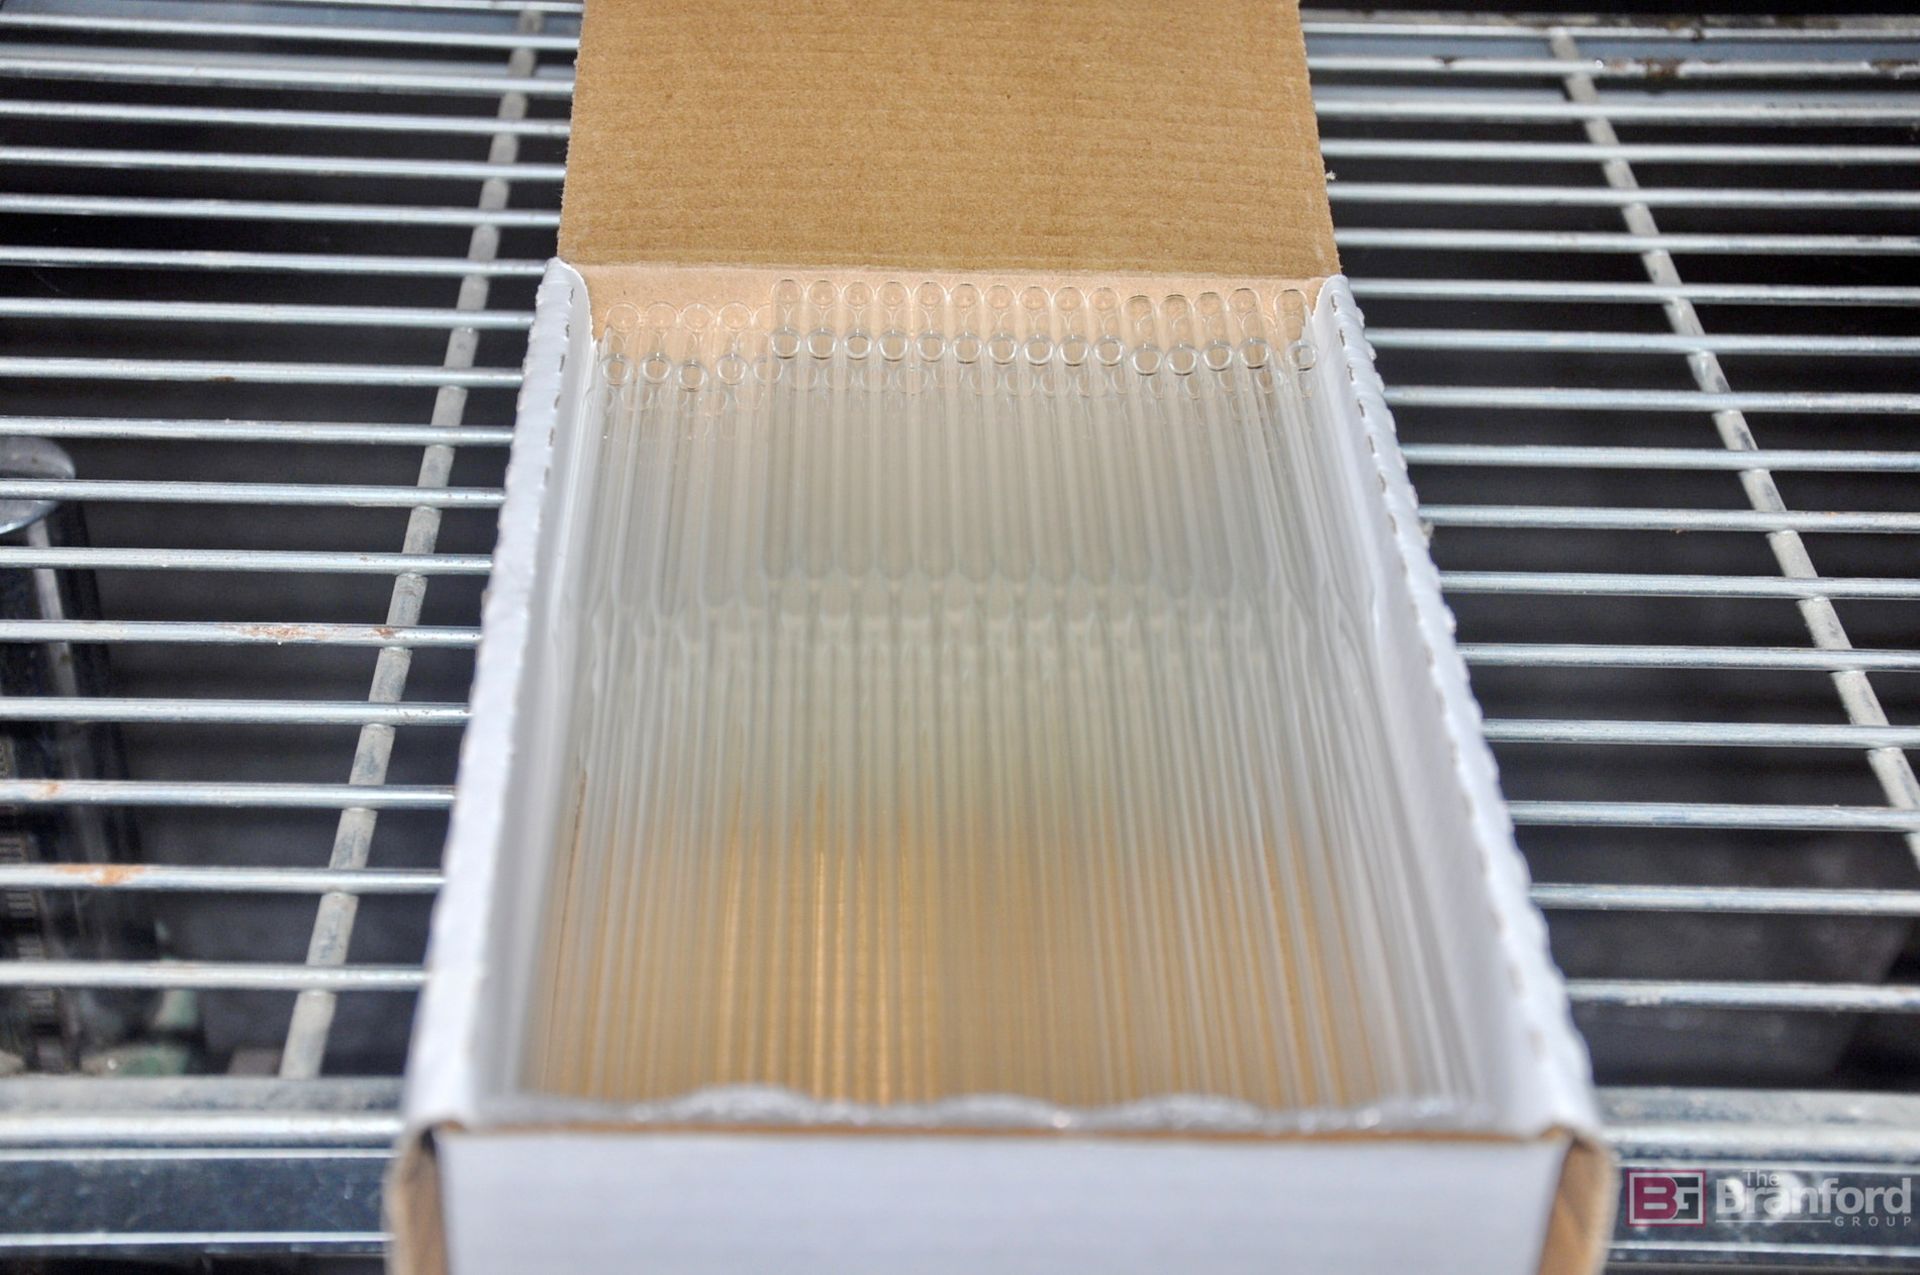 box of VWR glass pipettes - Image 2 of 2